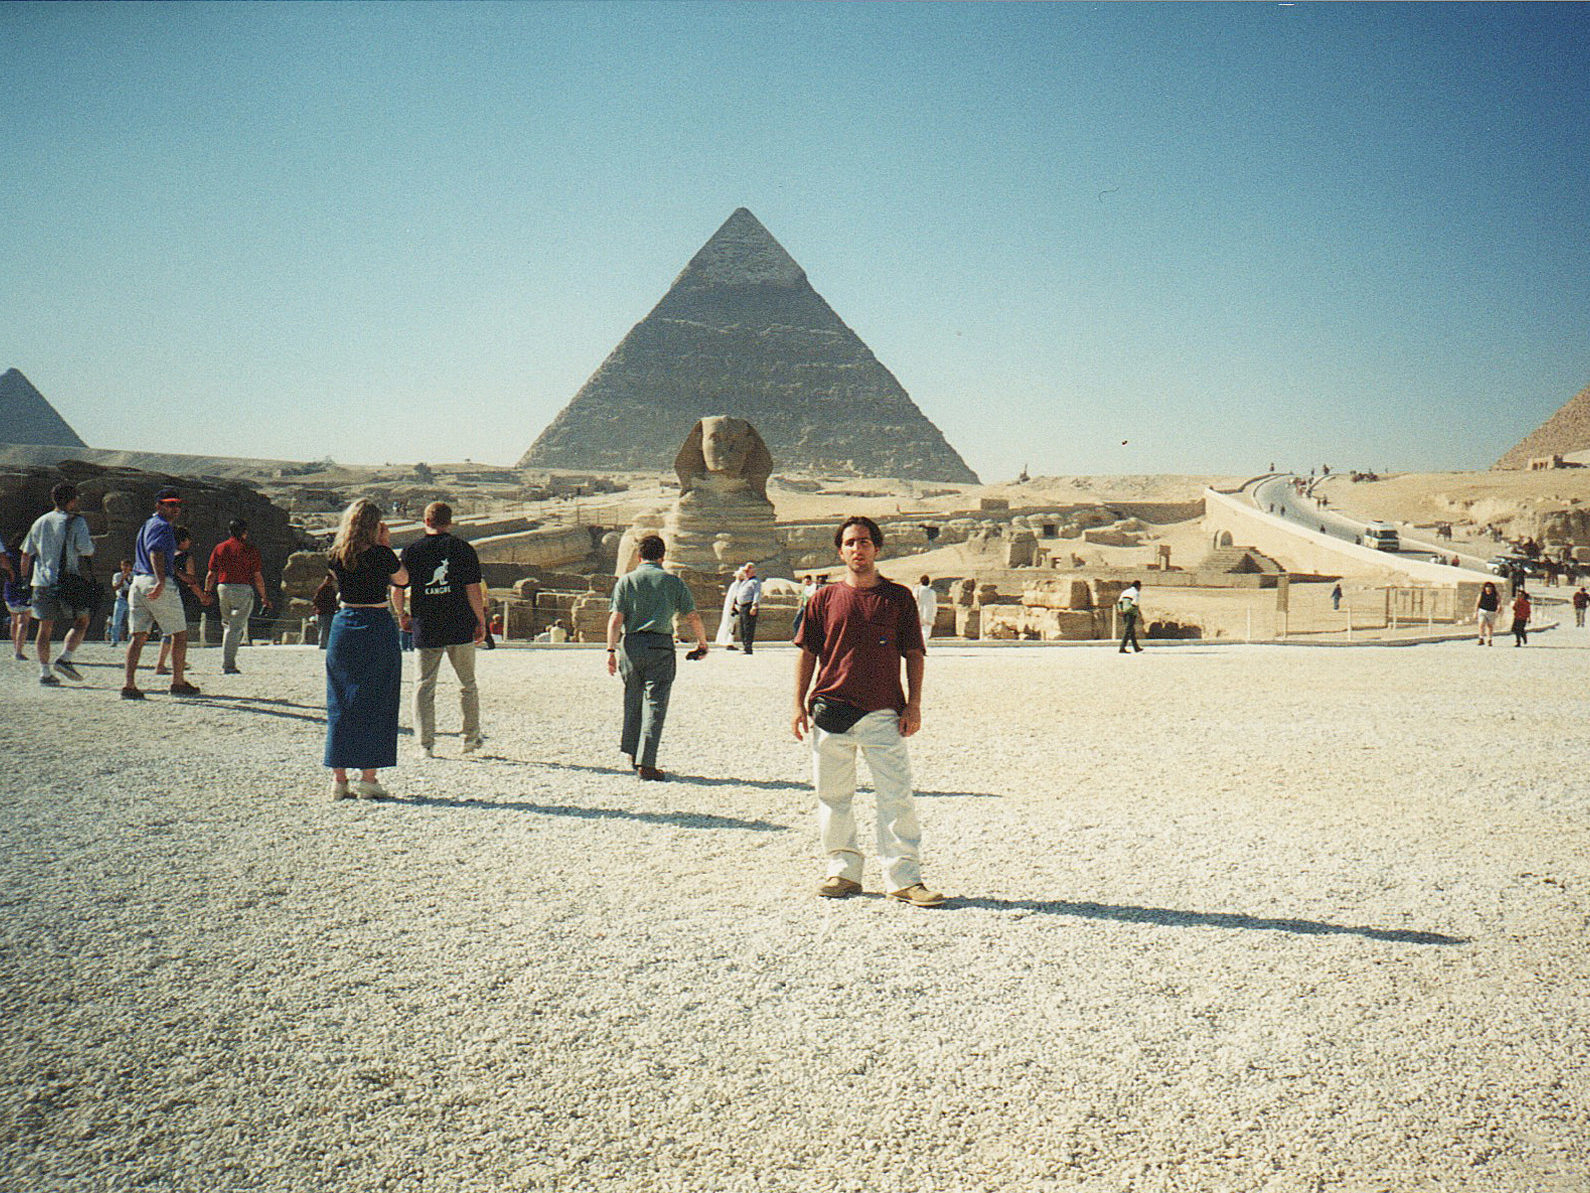 Phil Philips at the Pyramids of Egypt